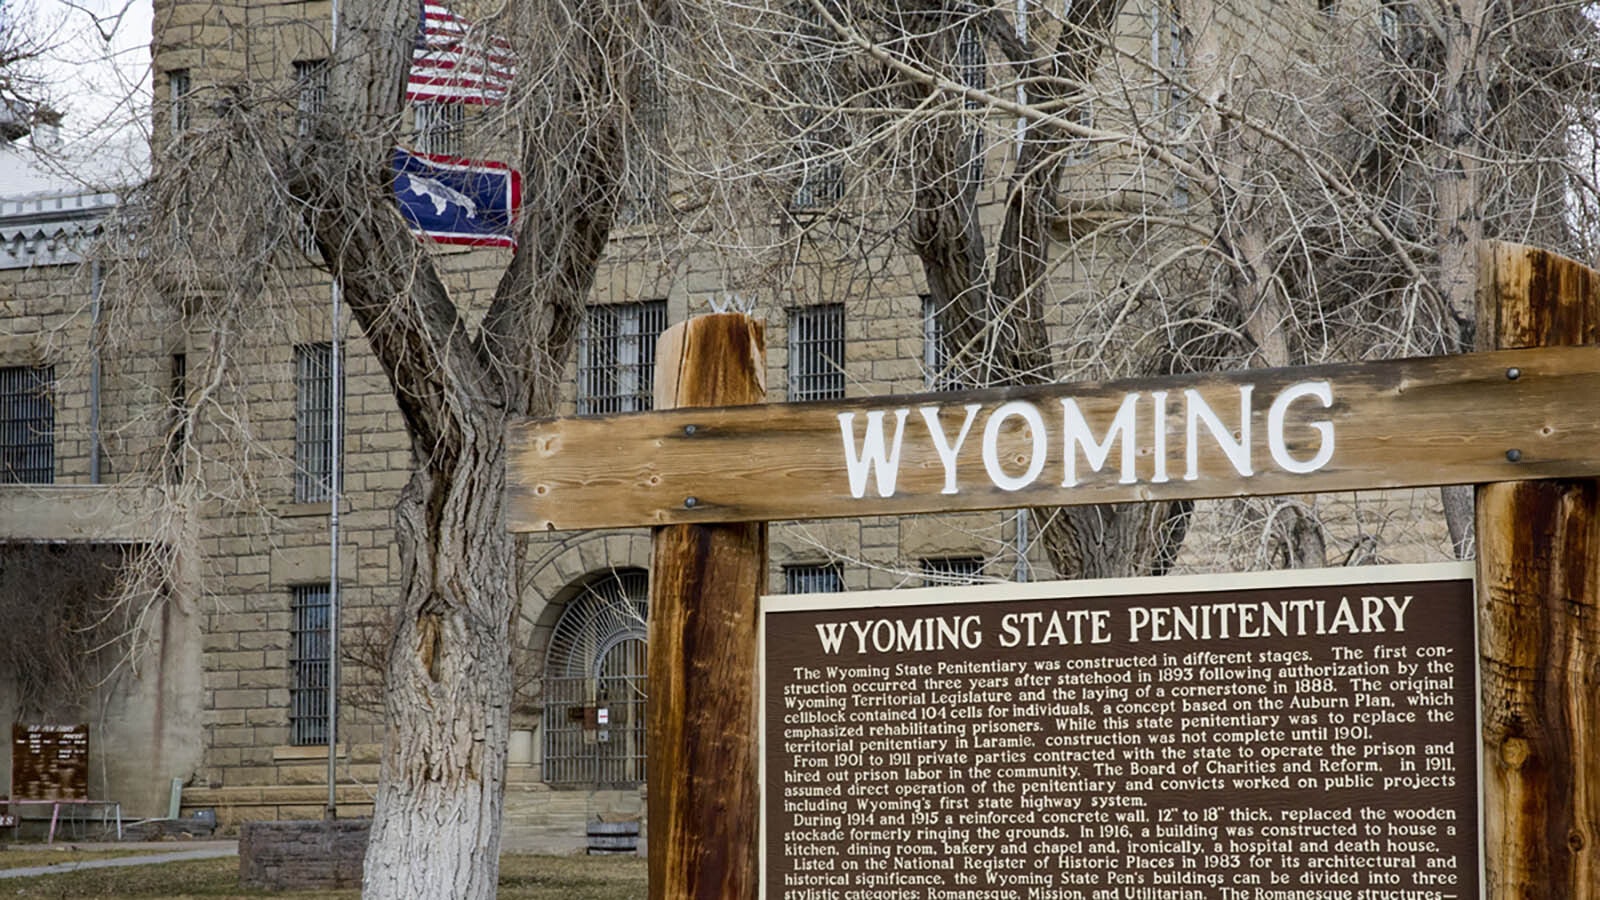 The historic Wyoming State Penitentiary is one of the most popular attractions for visitors to Rawlins, Wyoming.